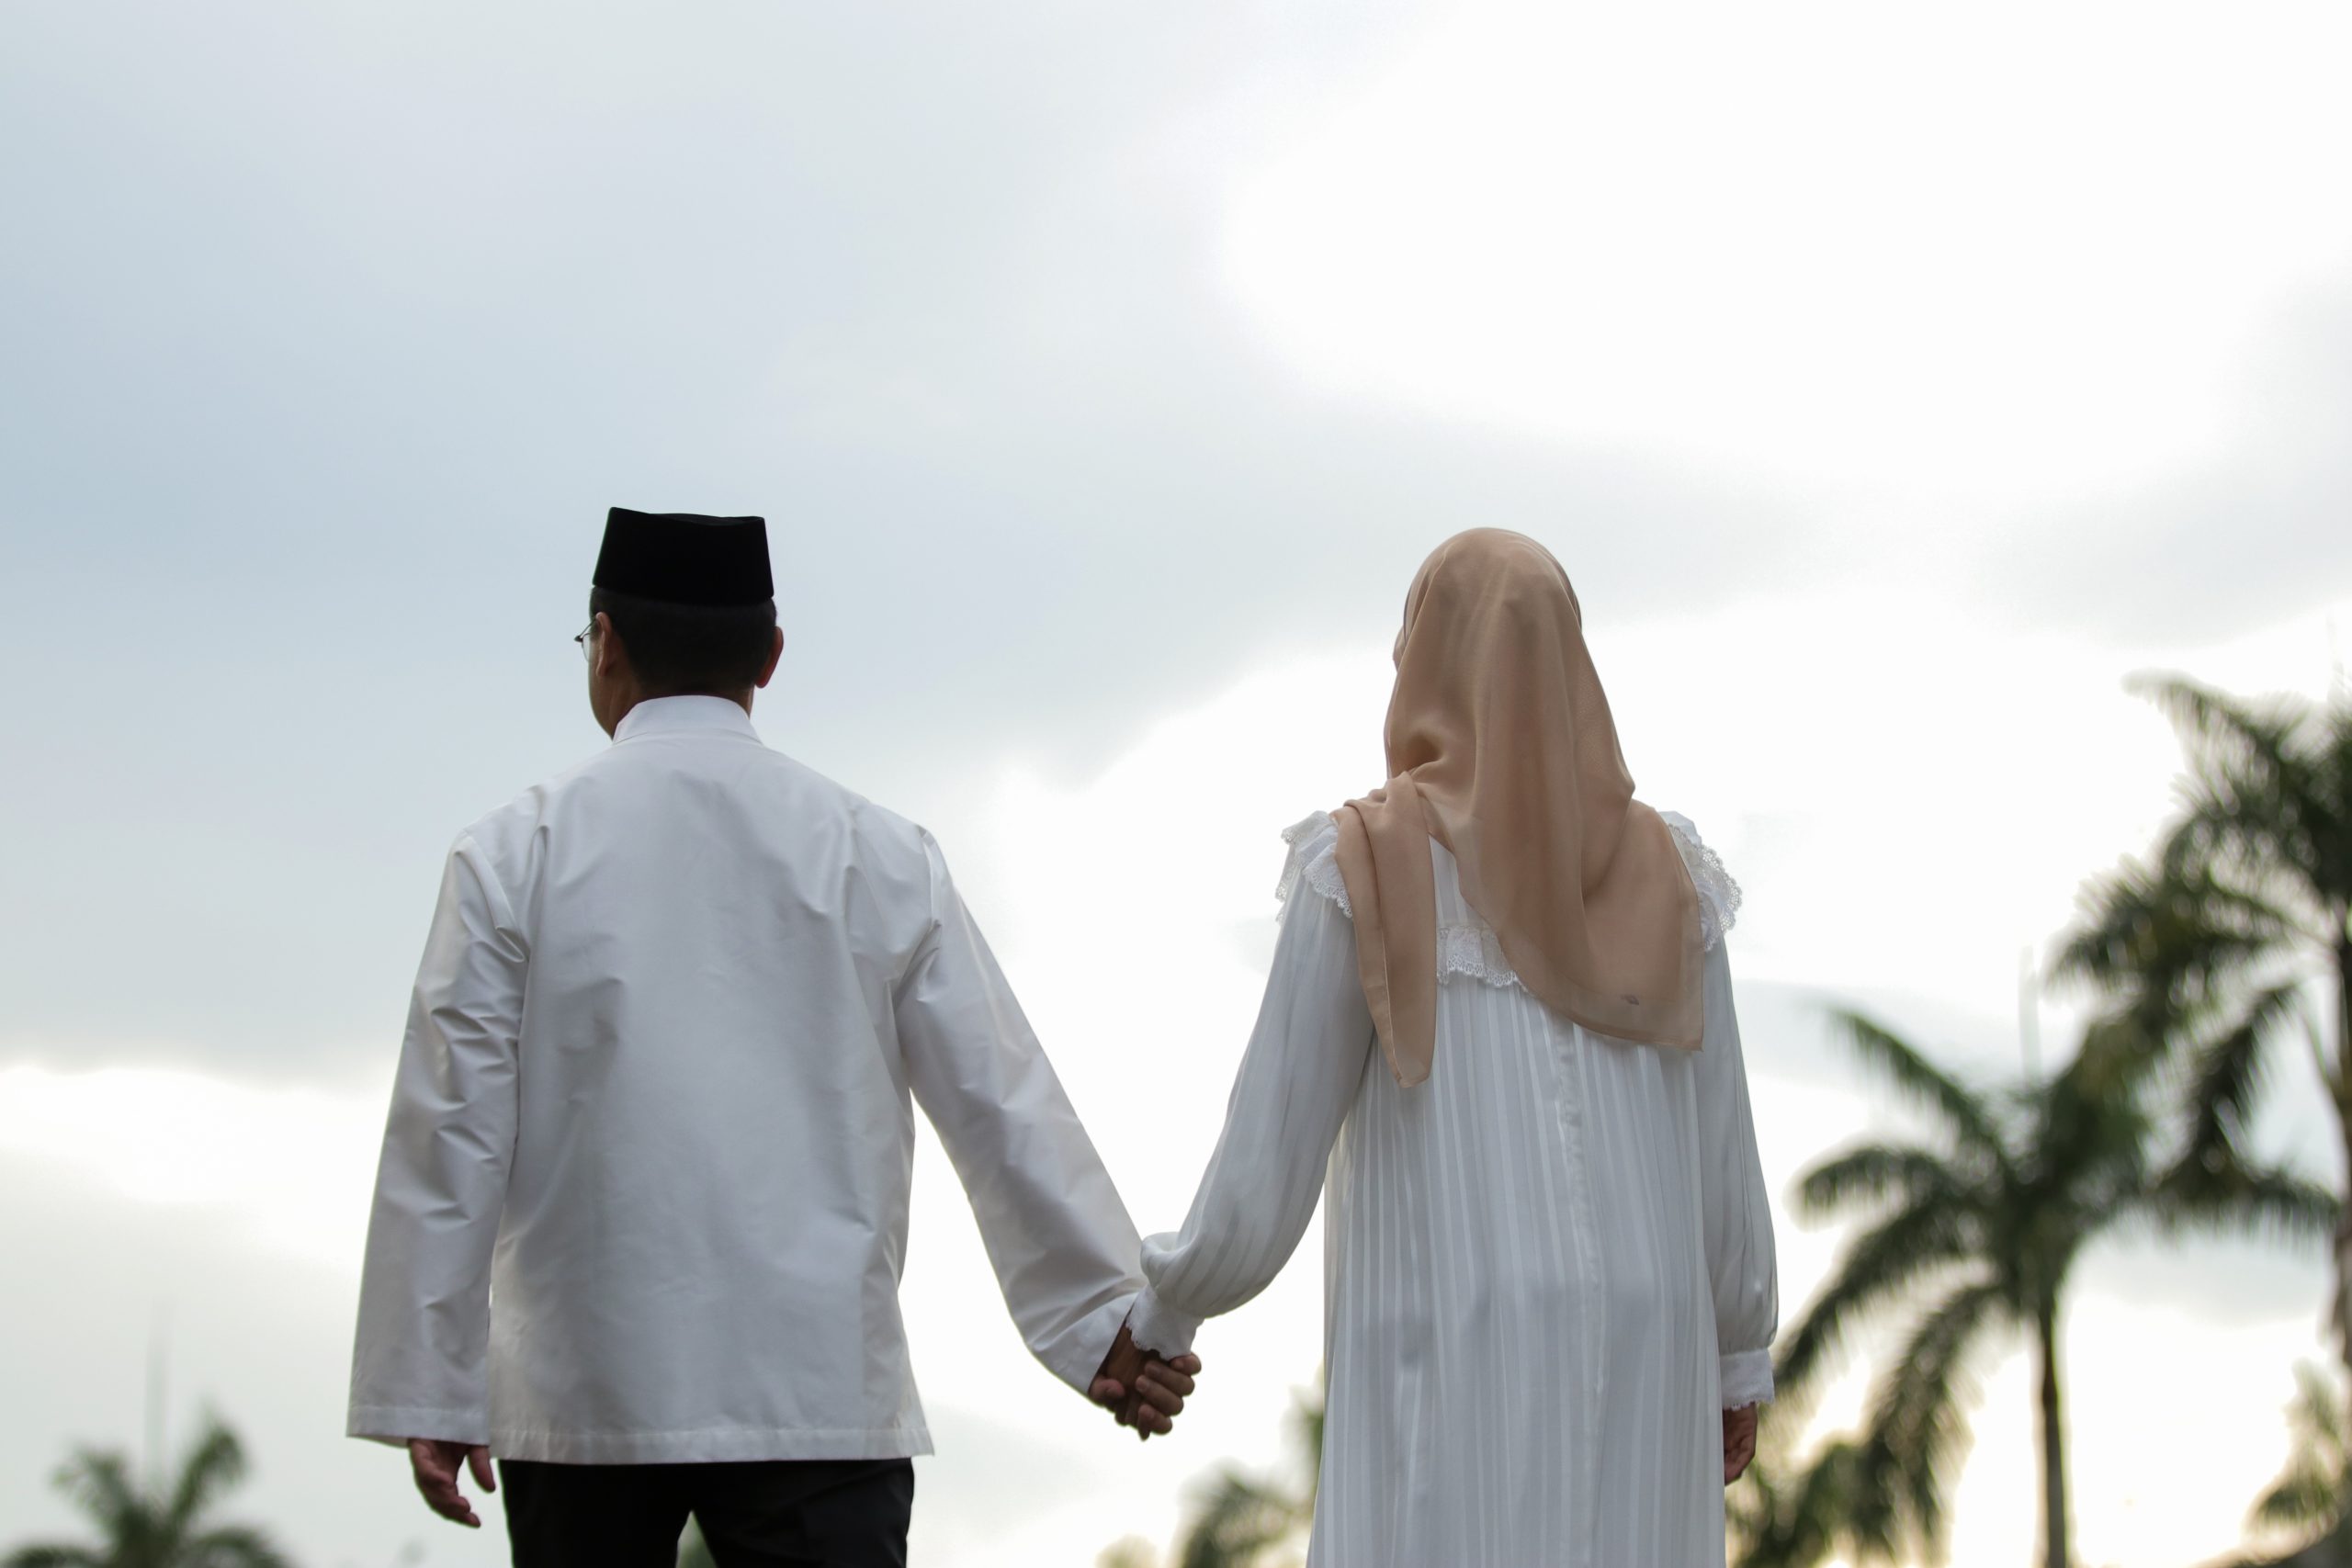 Indonesia to criminalise sex outside marriage